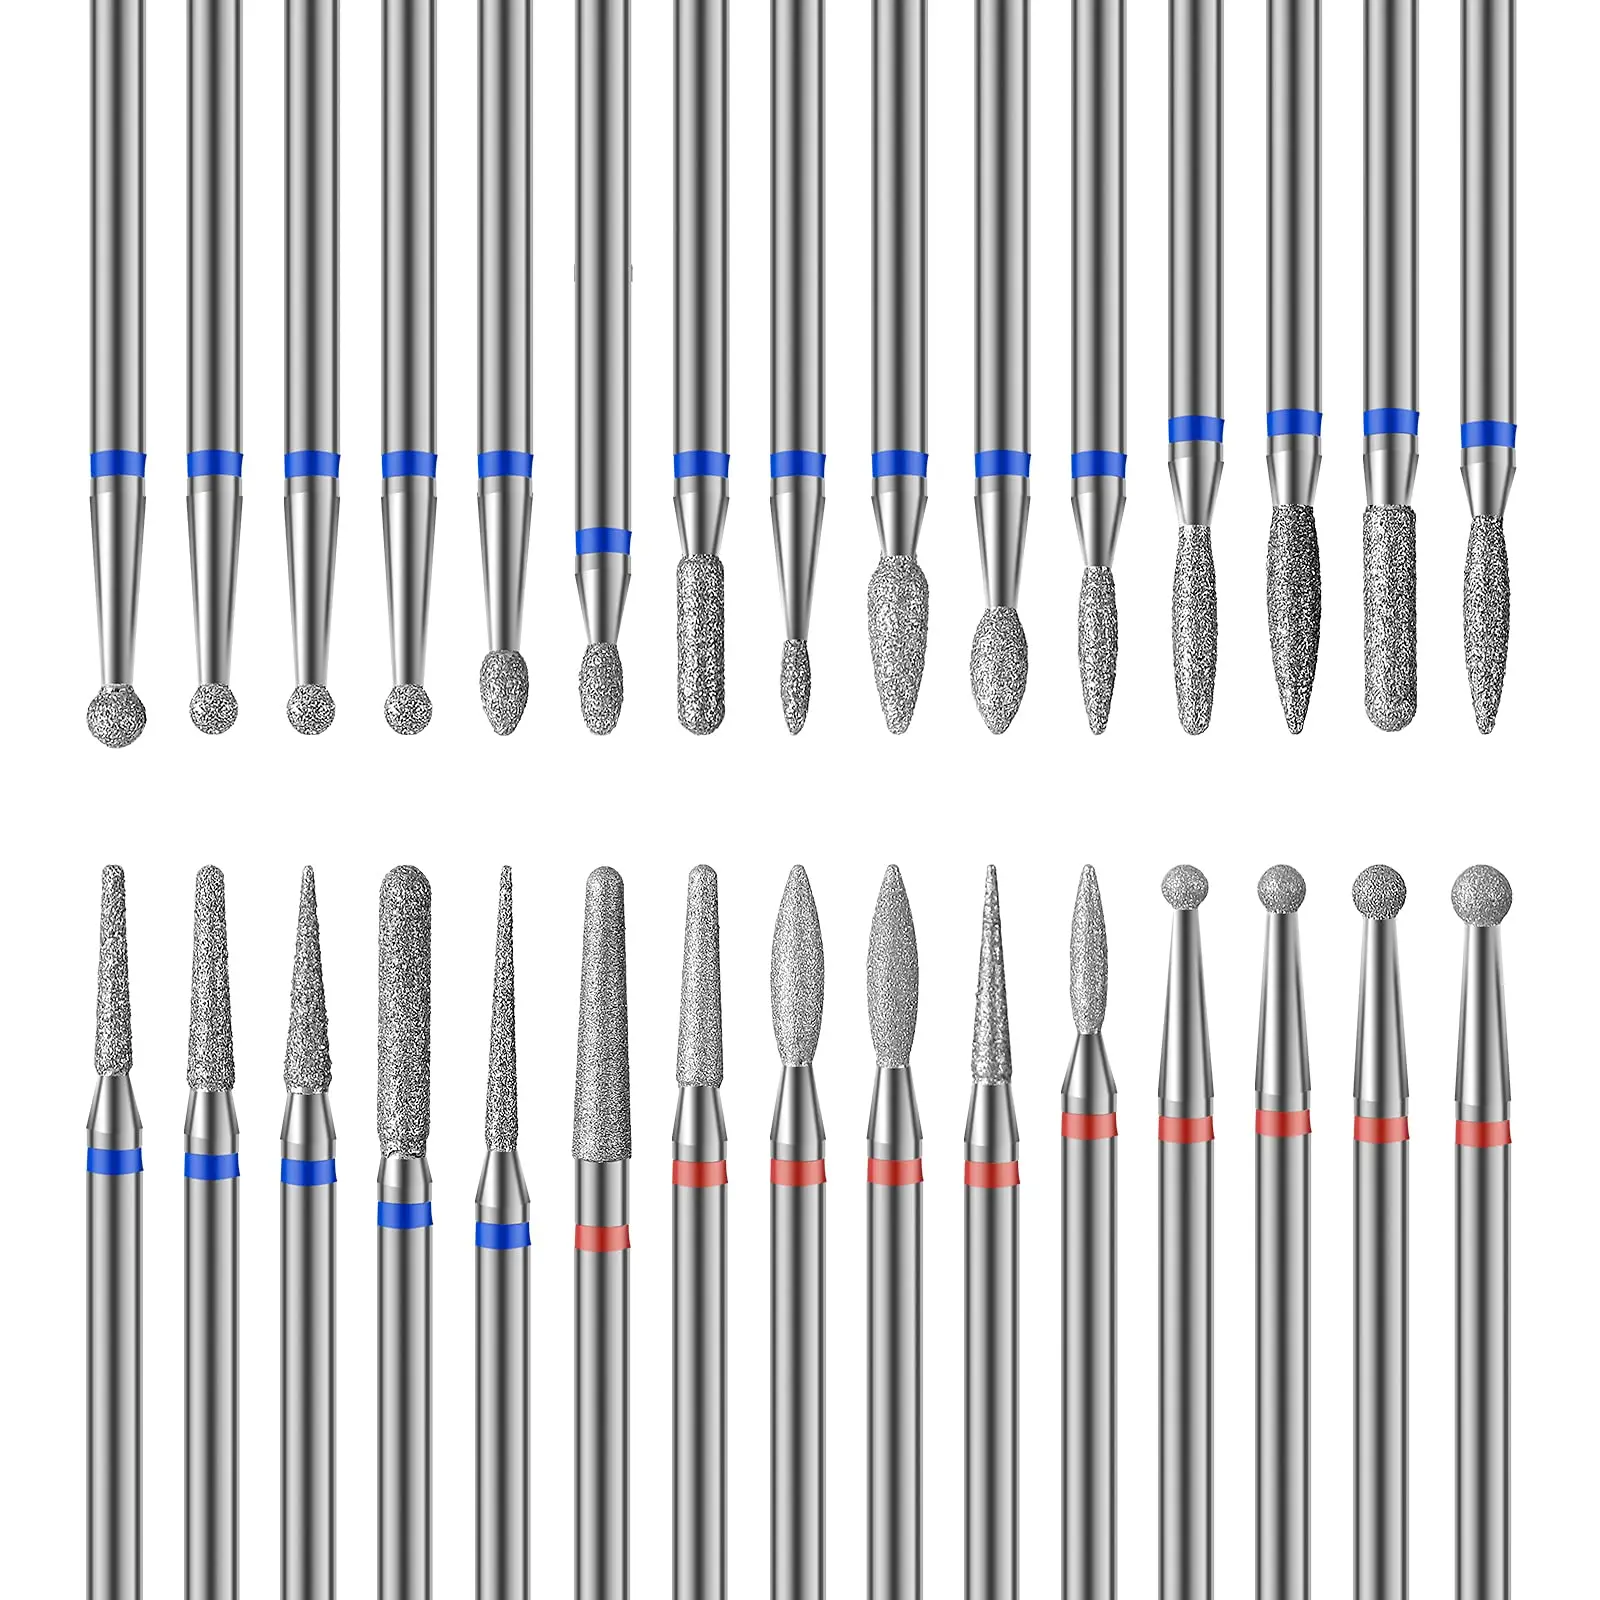 30Pcs Nail Drill Bits Set,3/32 Inch Tungsten Carbide Diamond Drill Polishing Grinding Heads Tools for Manicure Pedicure